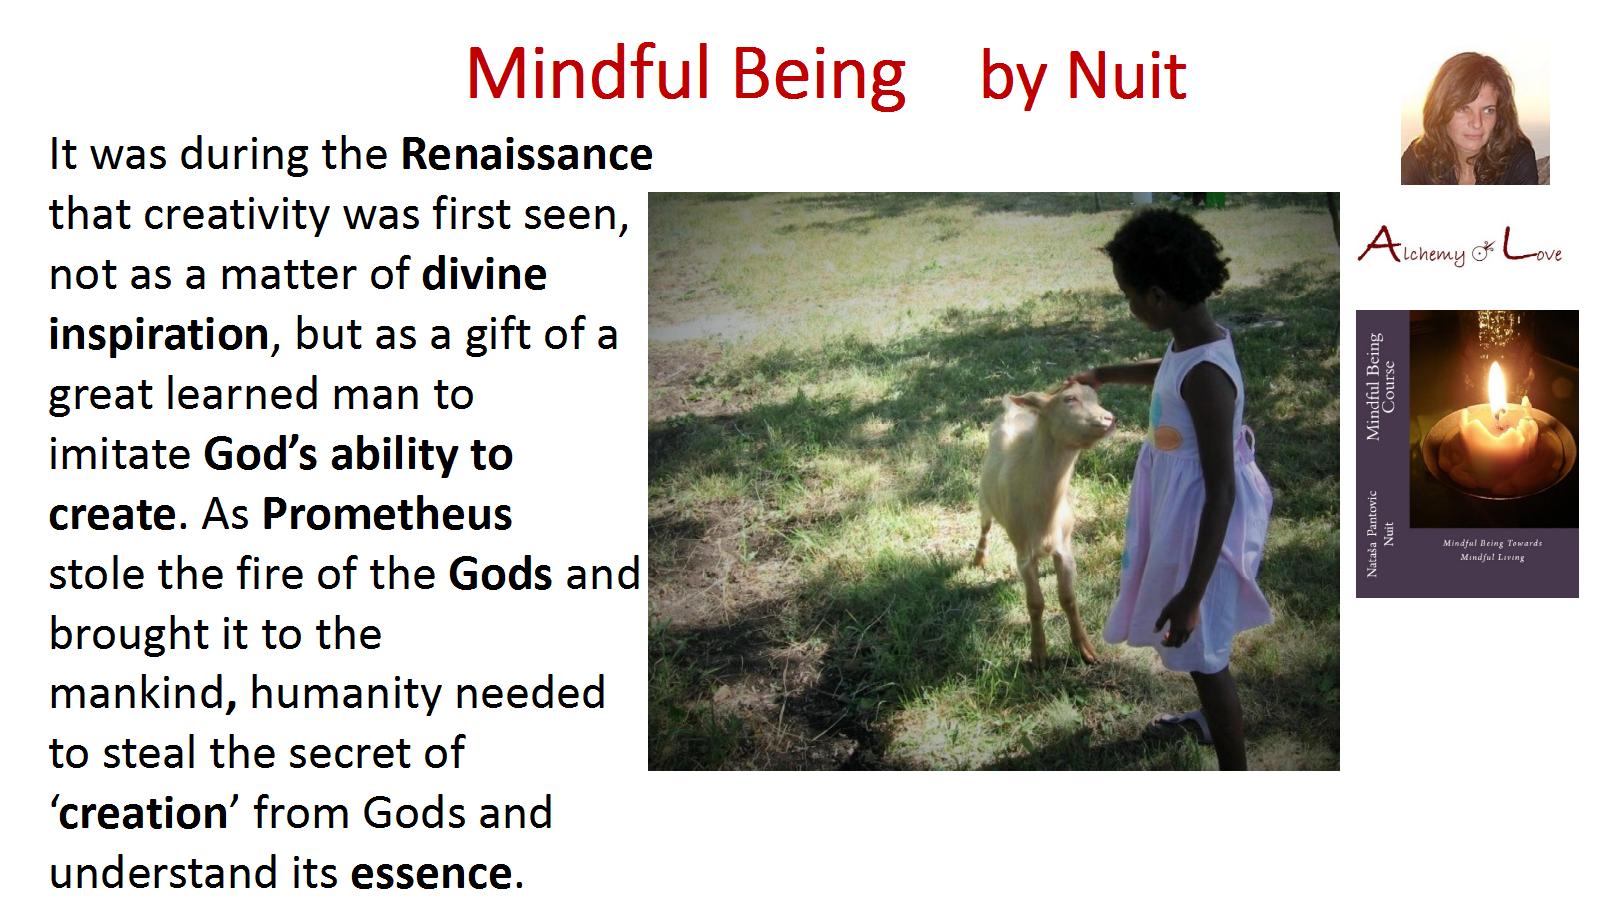 Creativity and divine inspiration quote from Mindful Being towards Mindful Living Course by Nataša Pantović Nuit